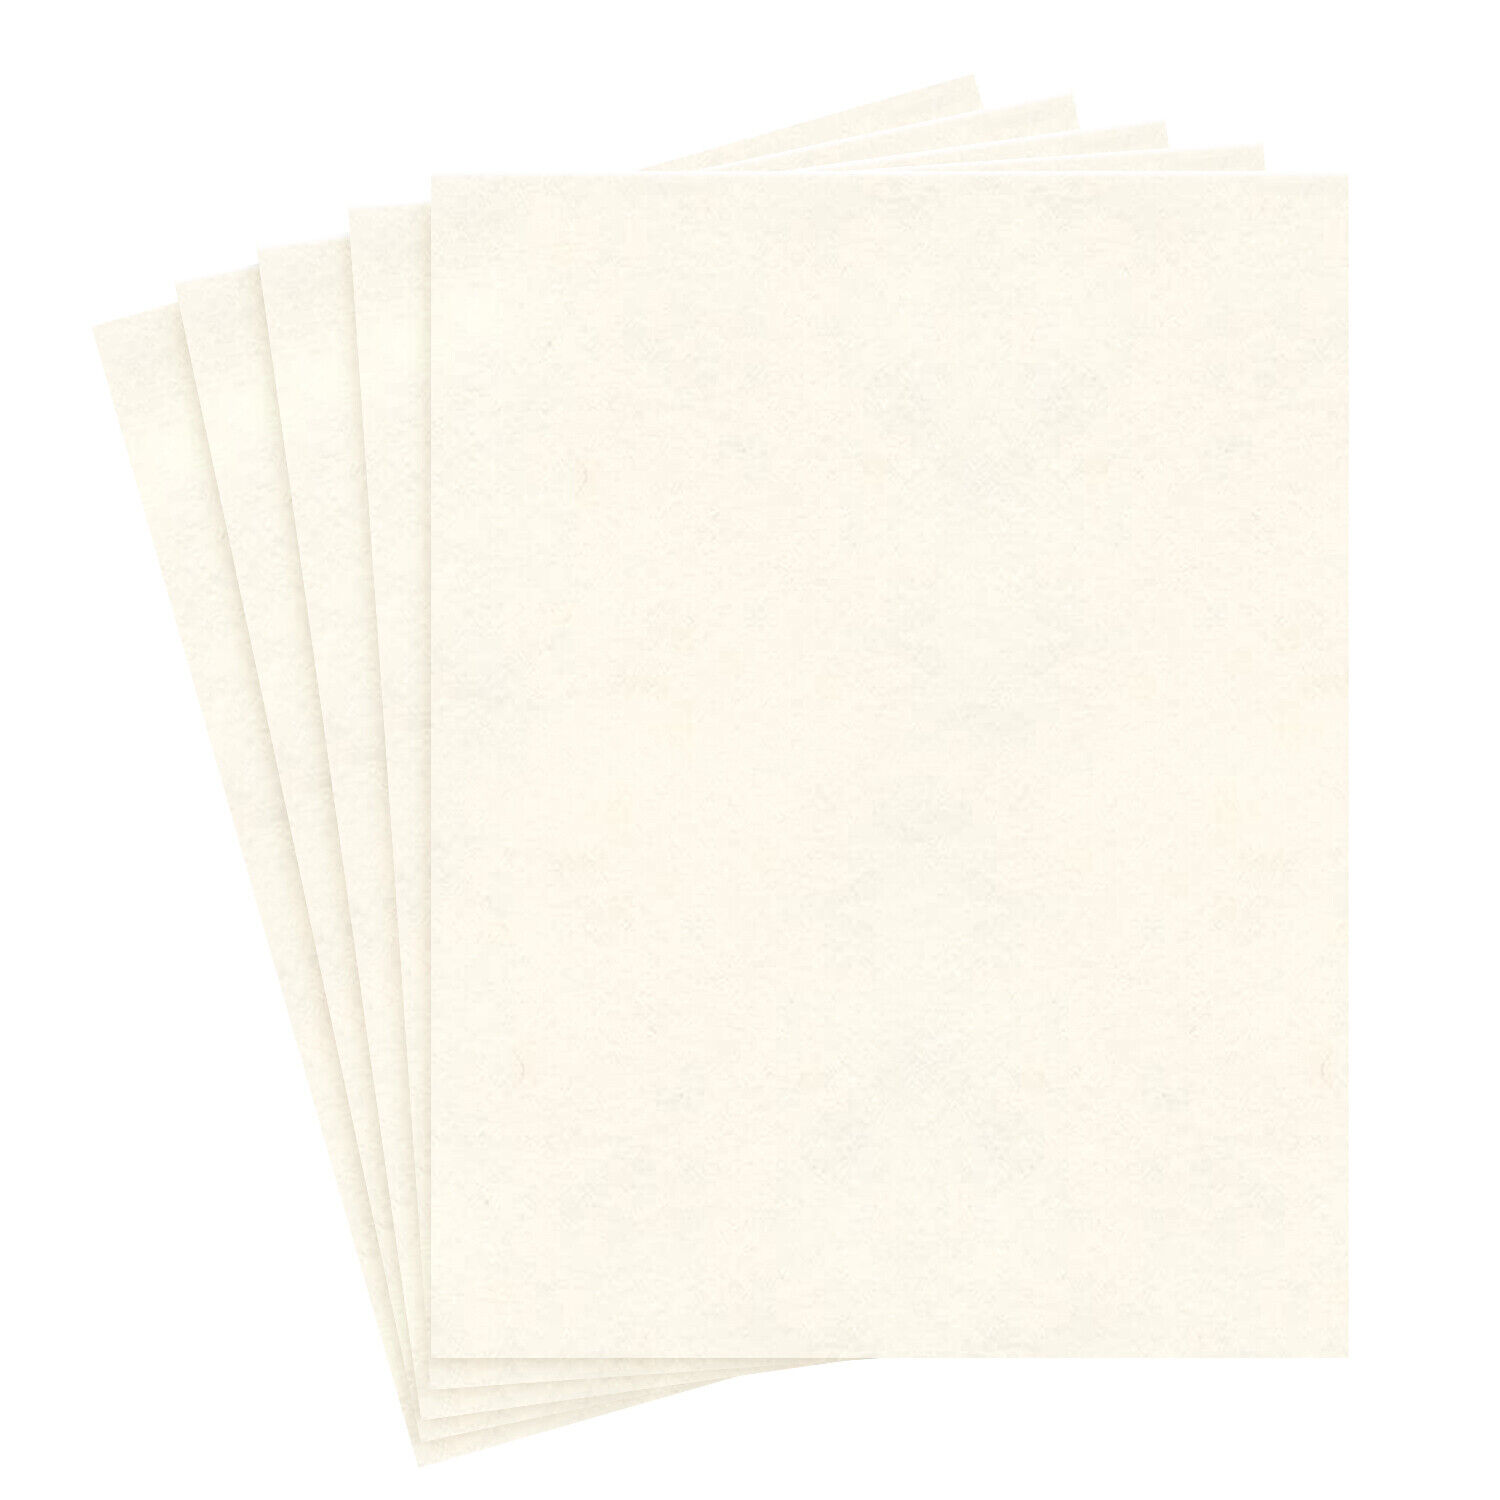 8.5 X 11" New White Stationery Parchment Cardstock Paper, 65lb Cover, 50 Qty